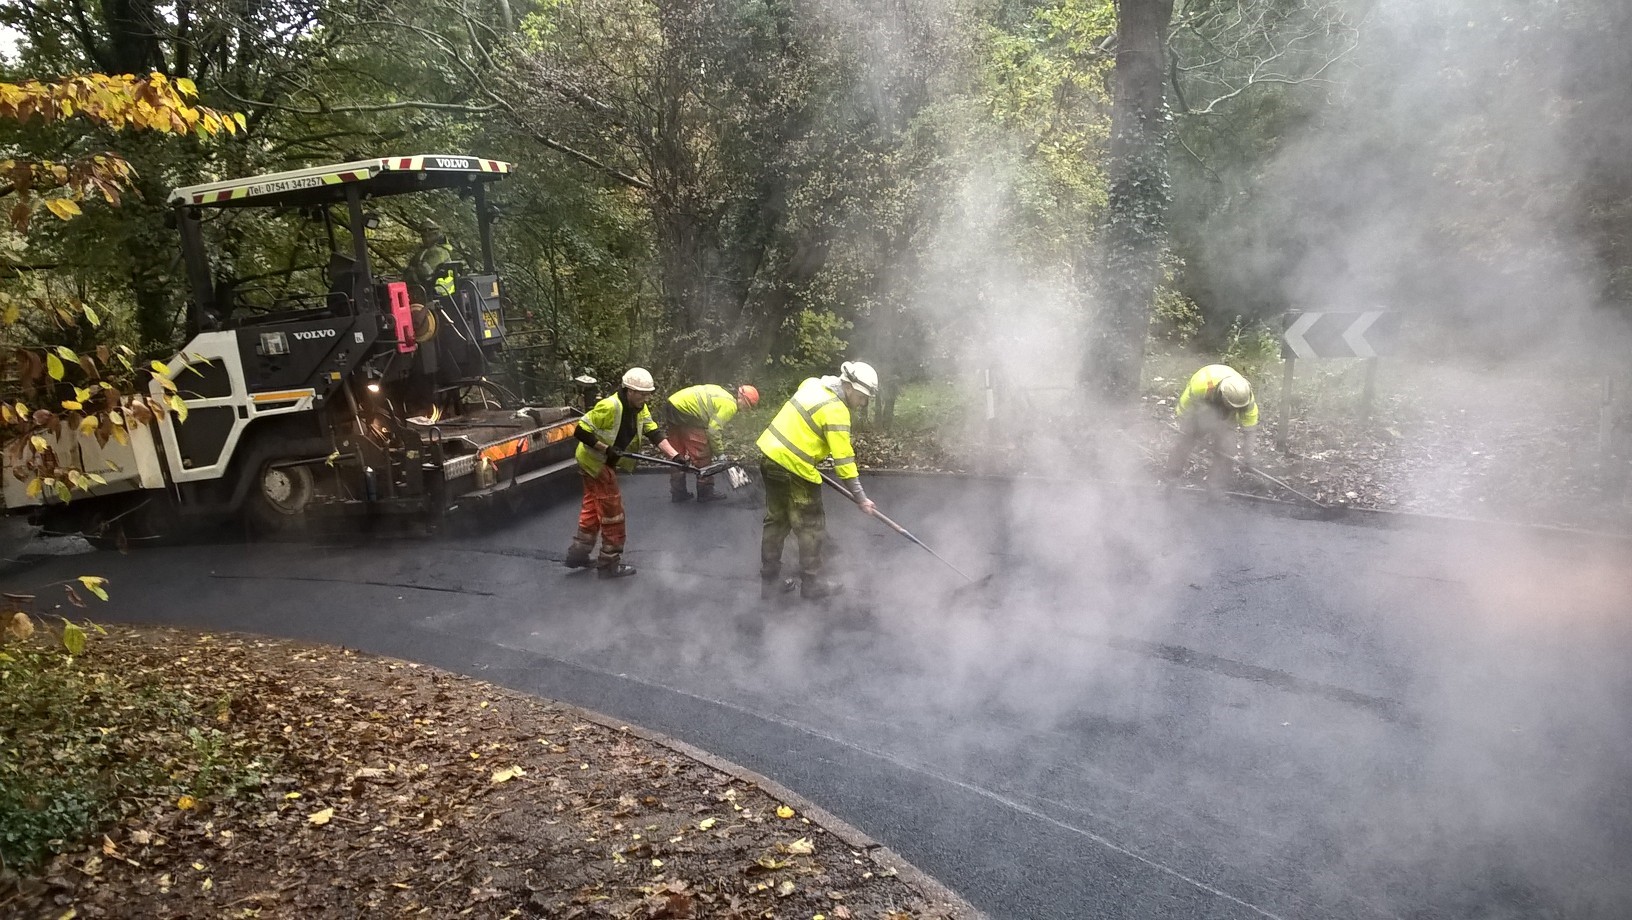 Workers tarmac road surrounded by trees